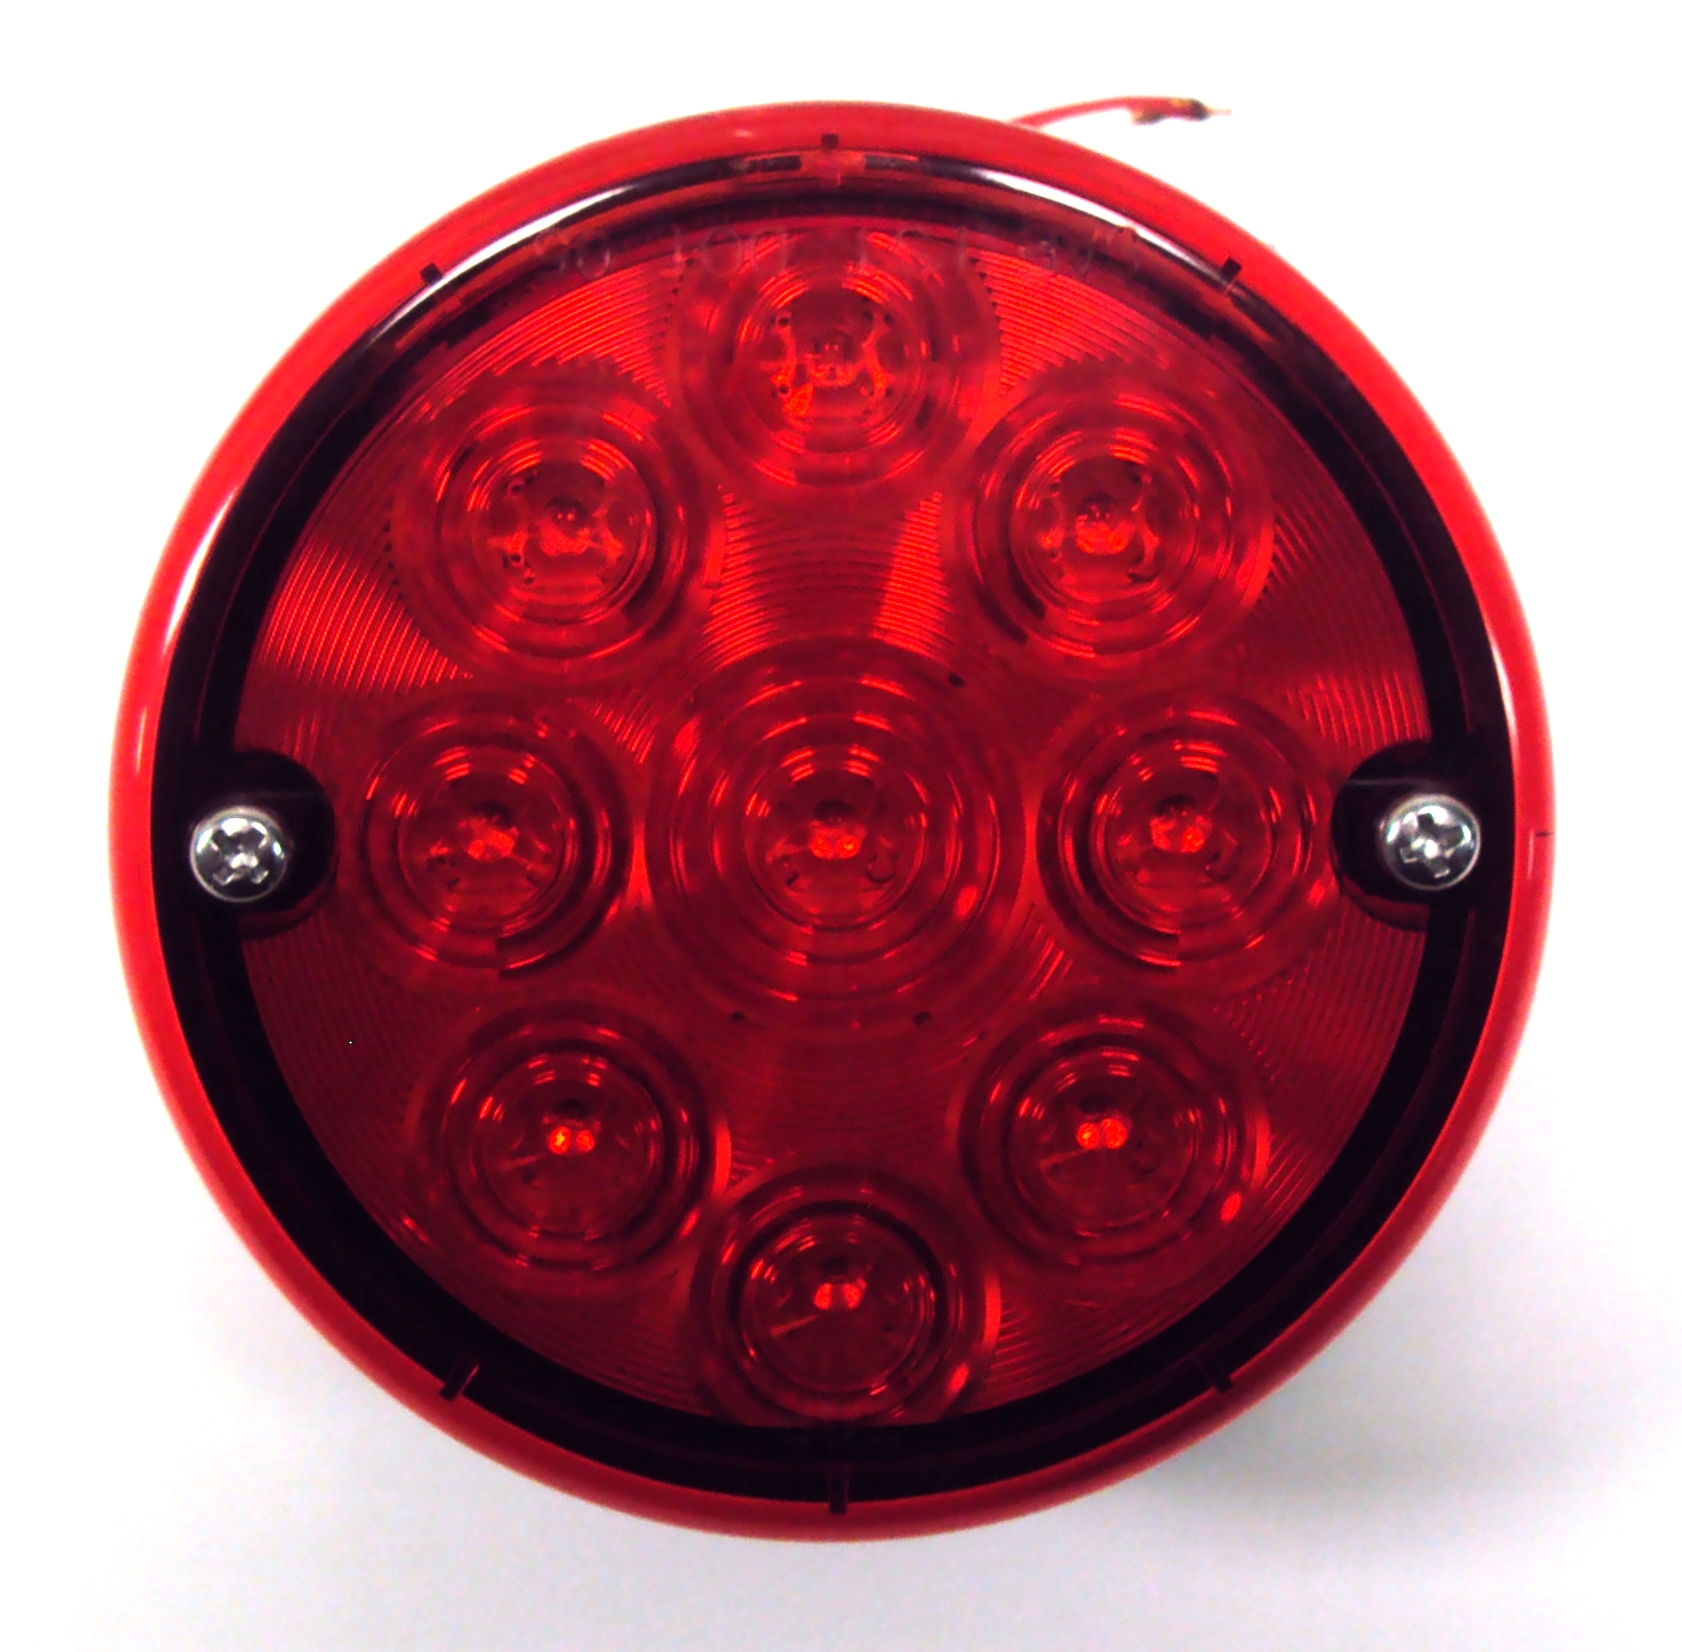 LED 4" Stop & Tail Light with License Light